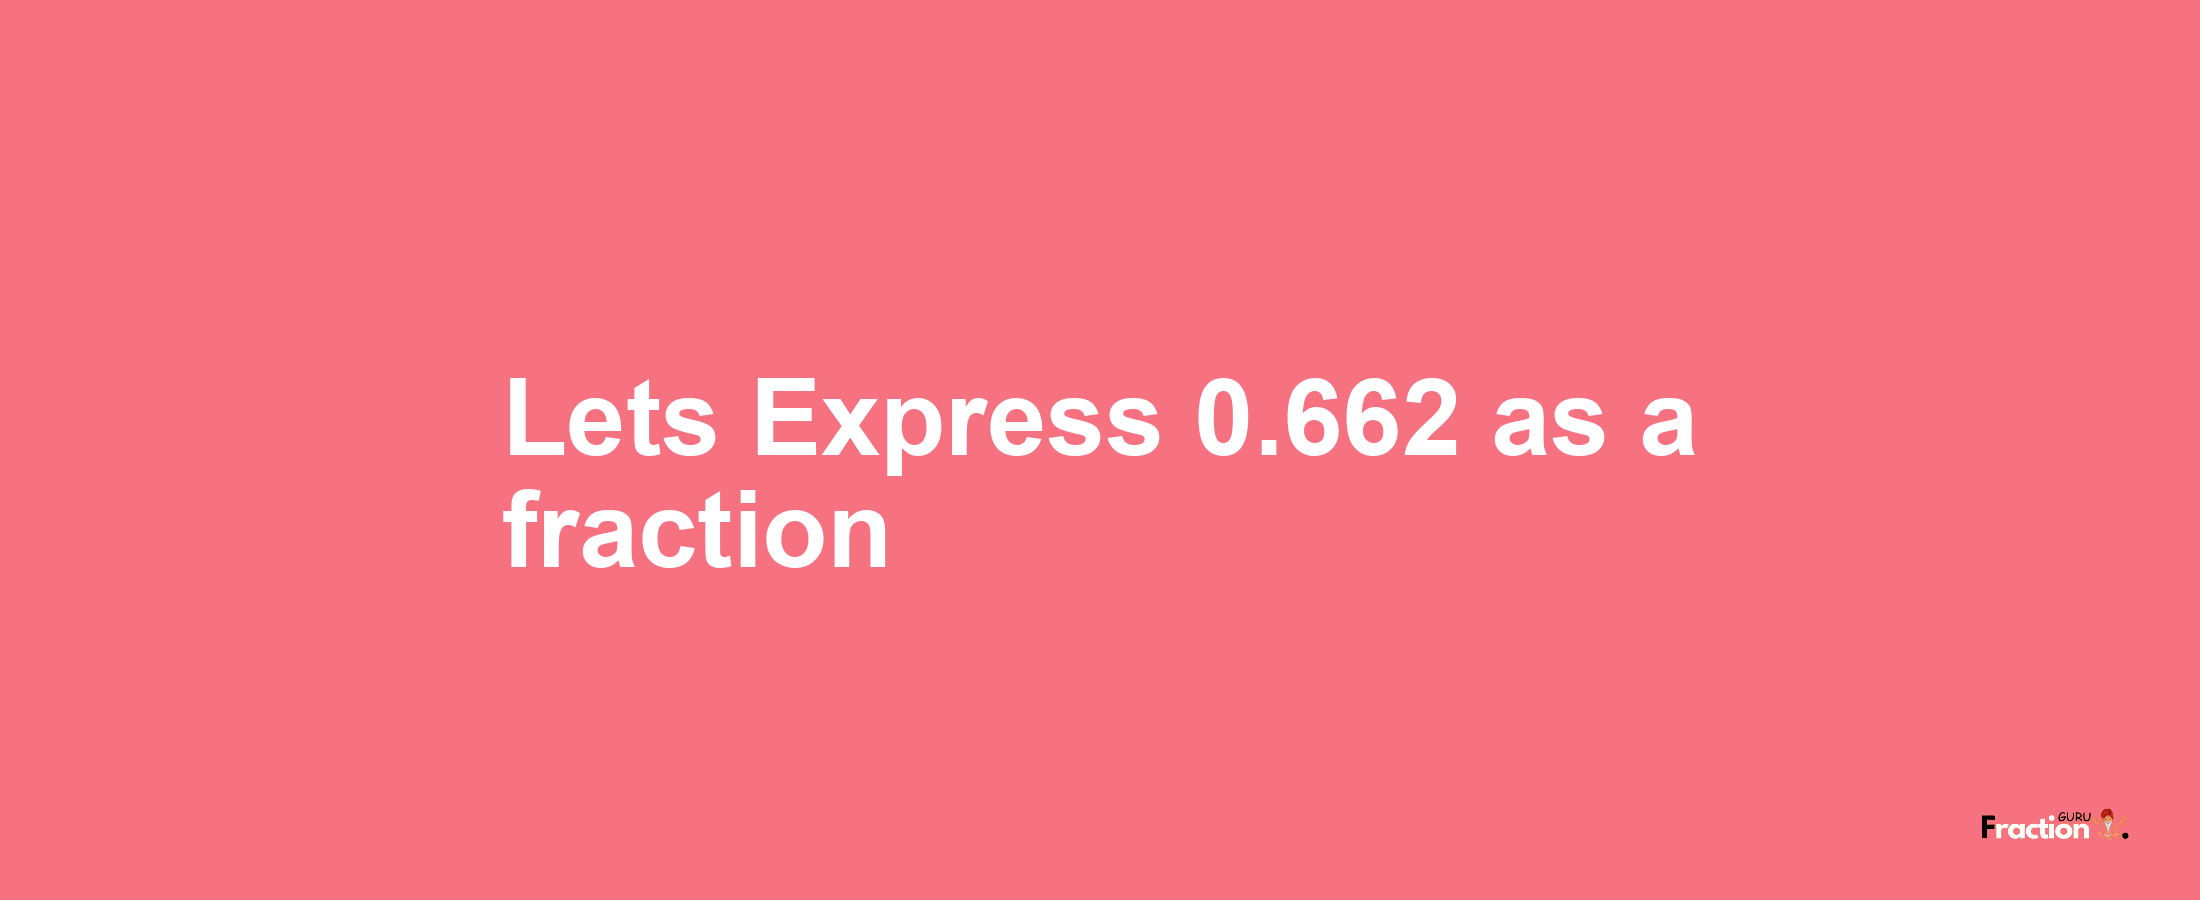 Lets Express 0.662 as afraction